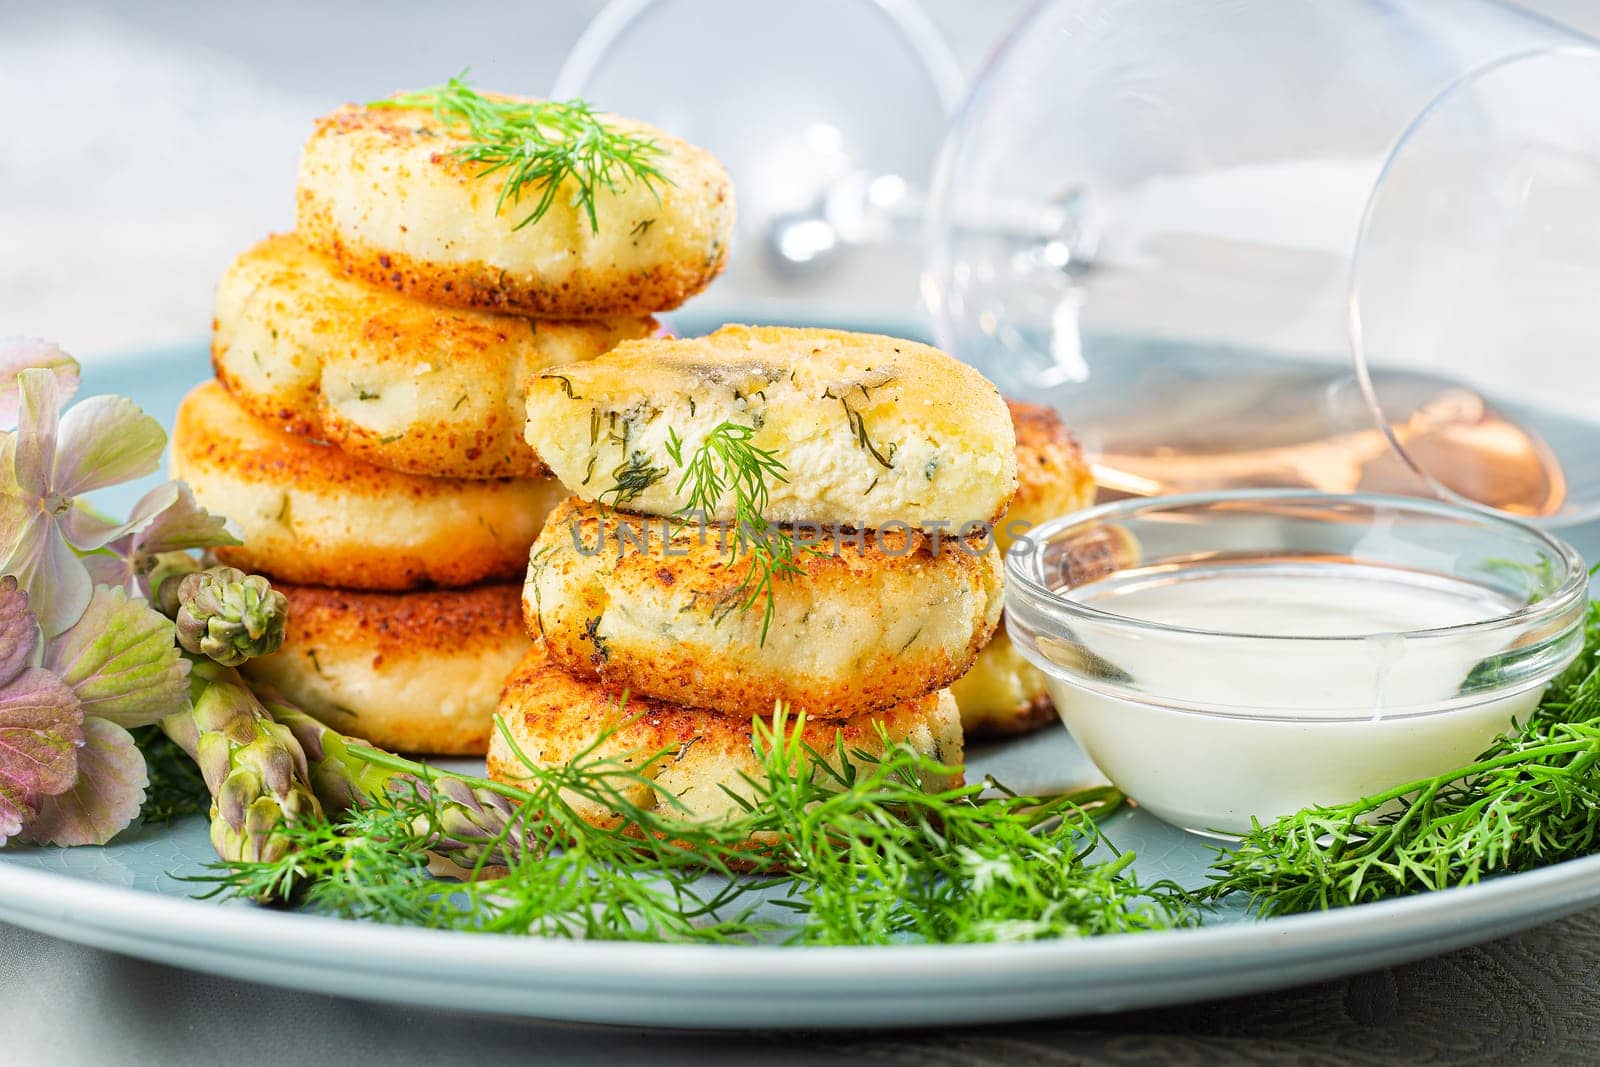 Fried cottage cheese pancakes syrniki with dill and asparagus on a blue plate served with sour cream and wine. by Gravika